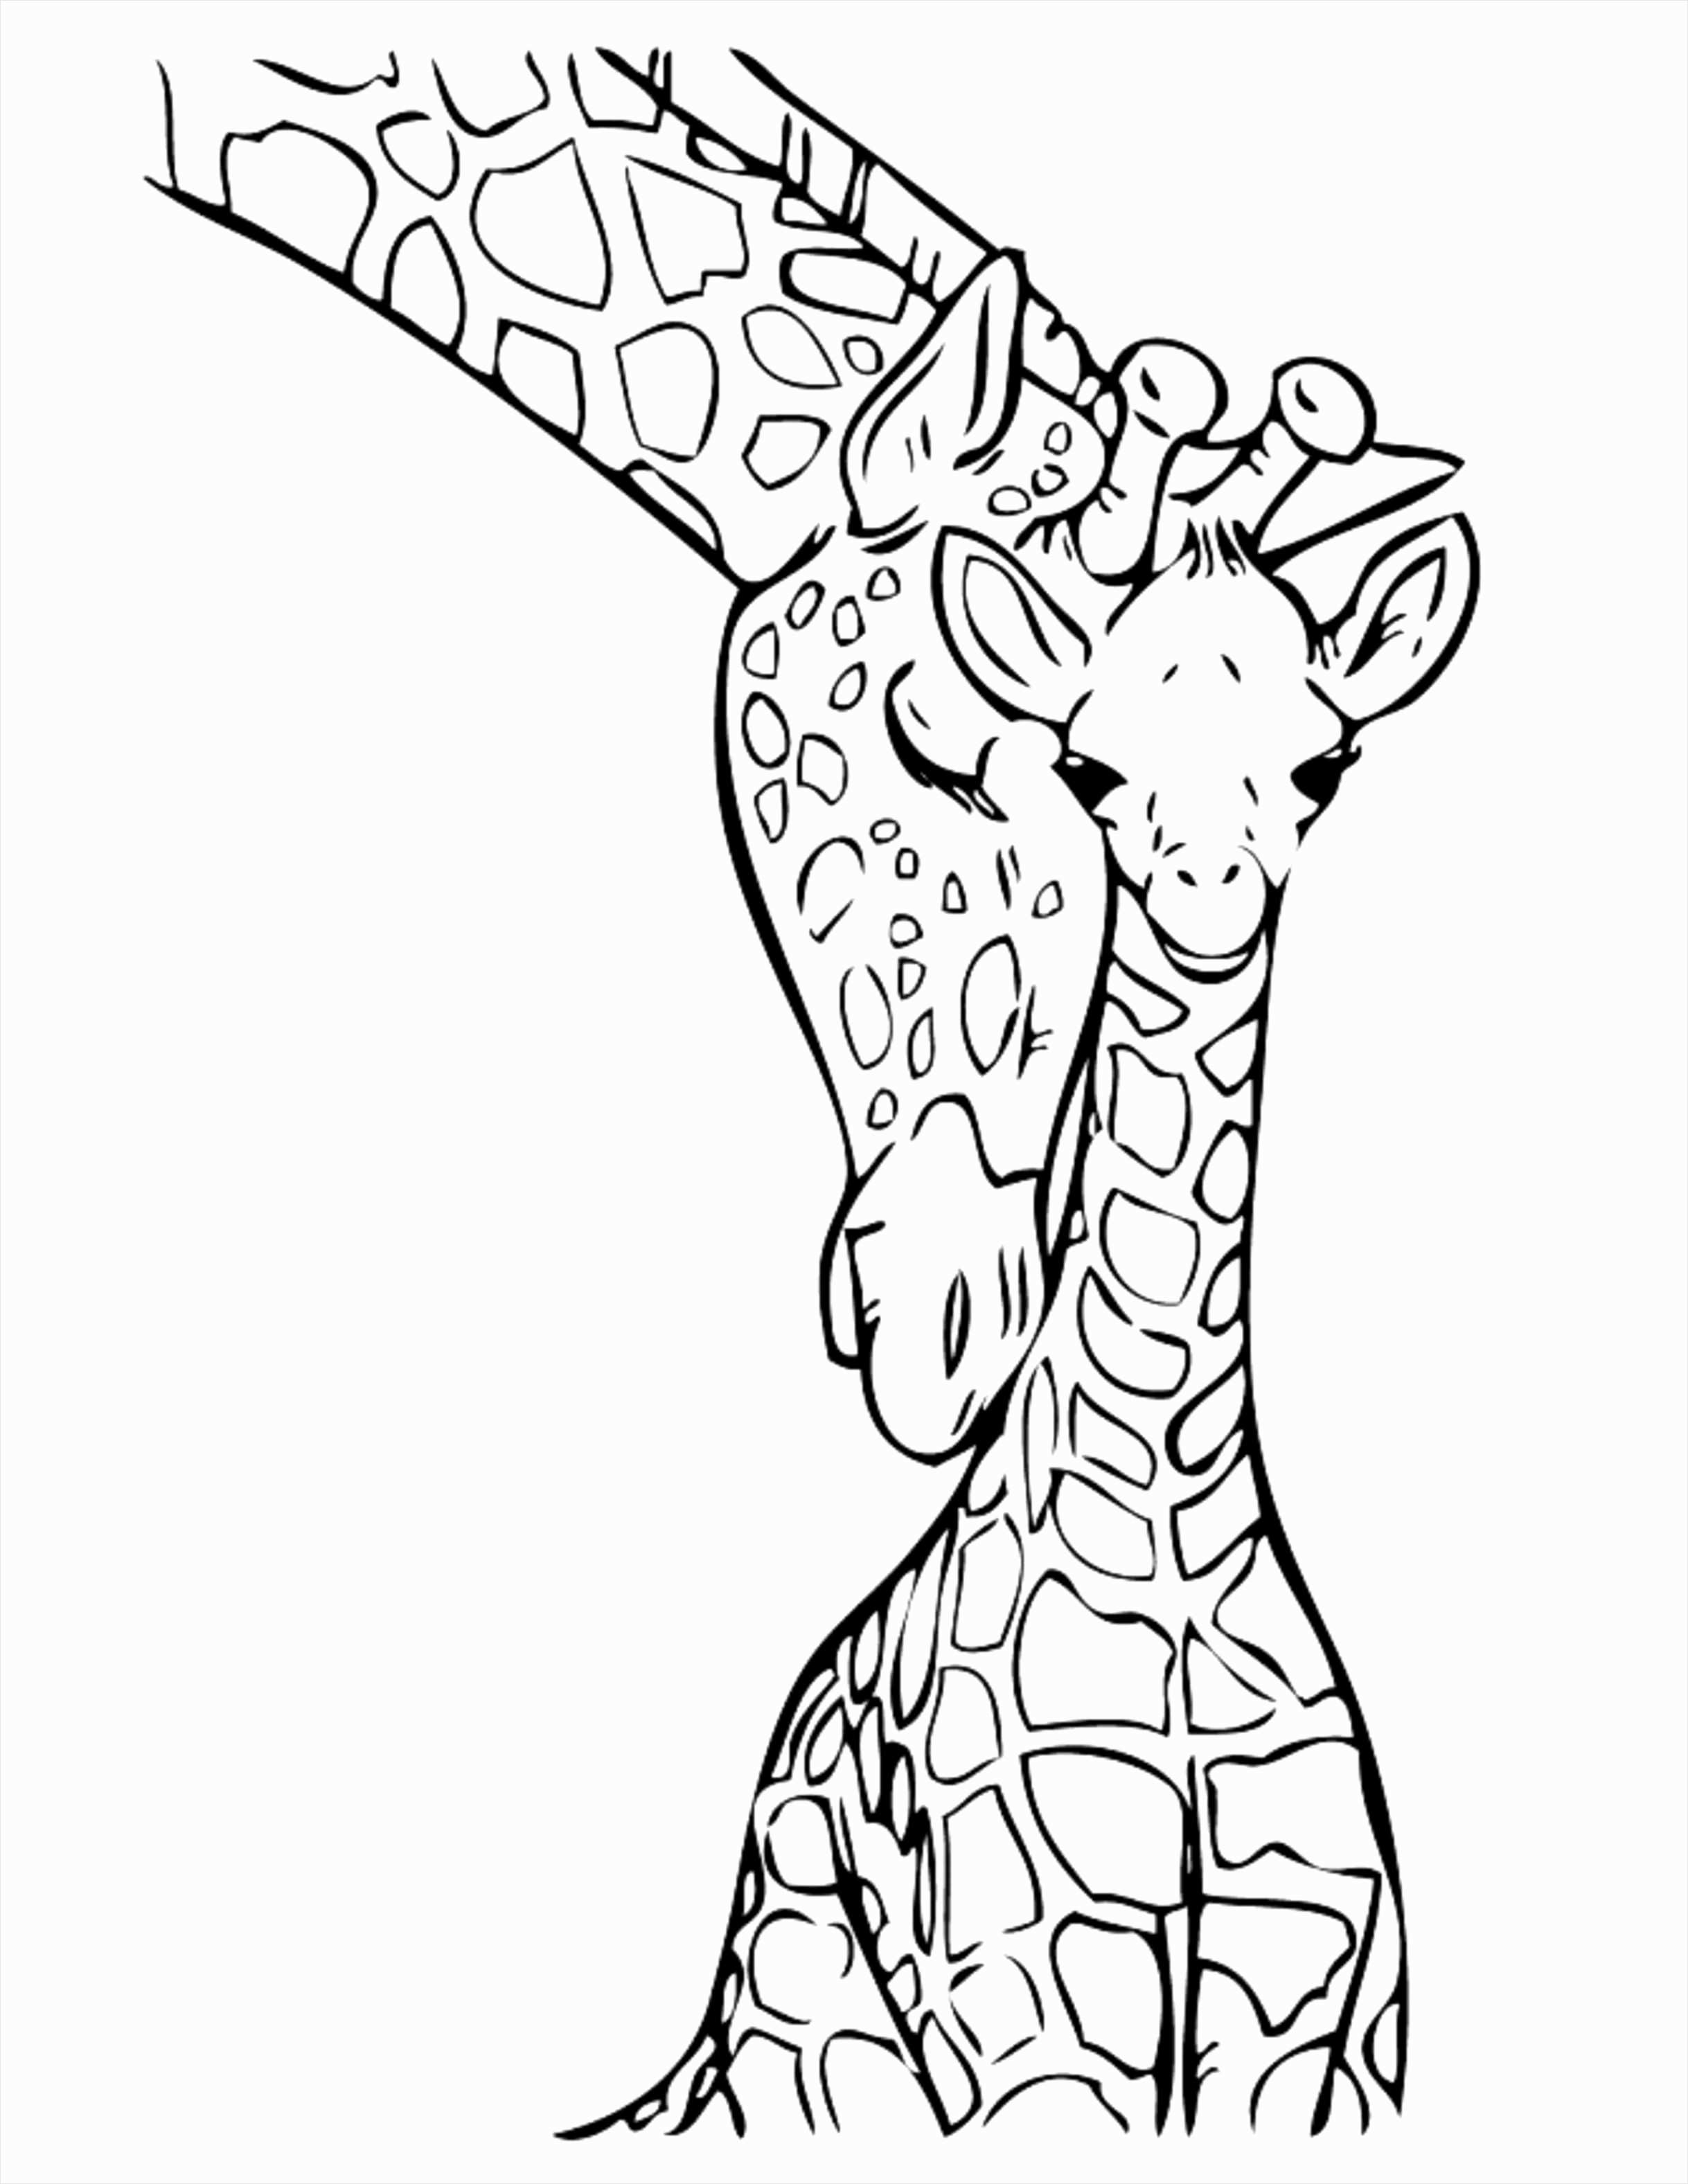 Coloring Pages Of Stuffed Animals Images Of Coloring Pages Of Stuffed Animals Sabadaphnecottage